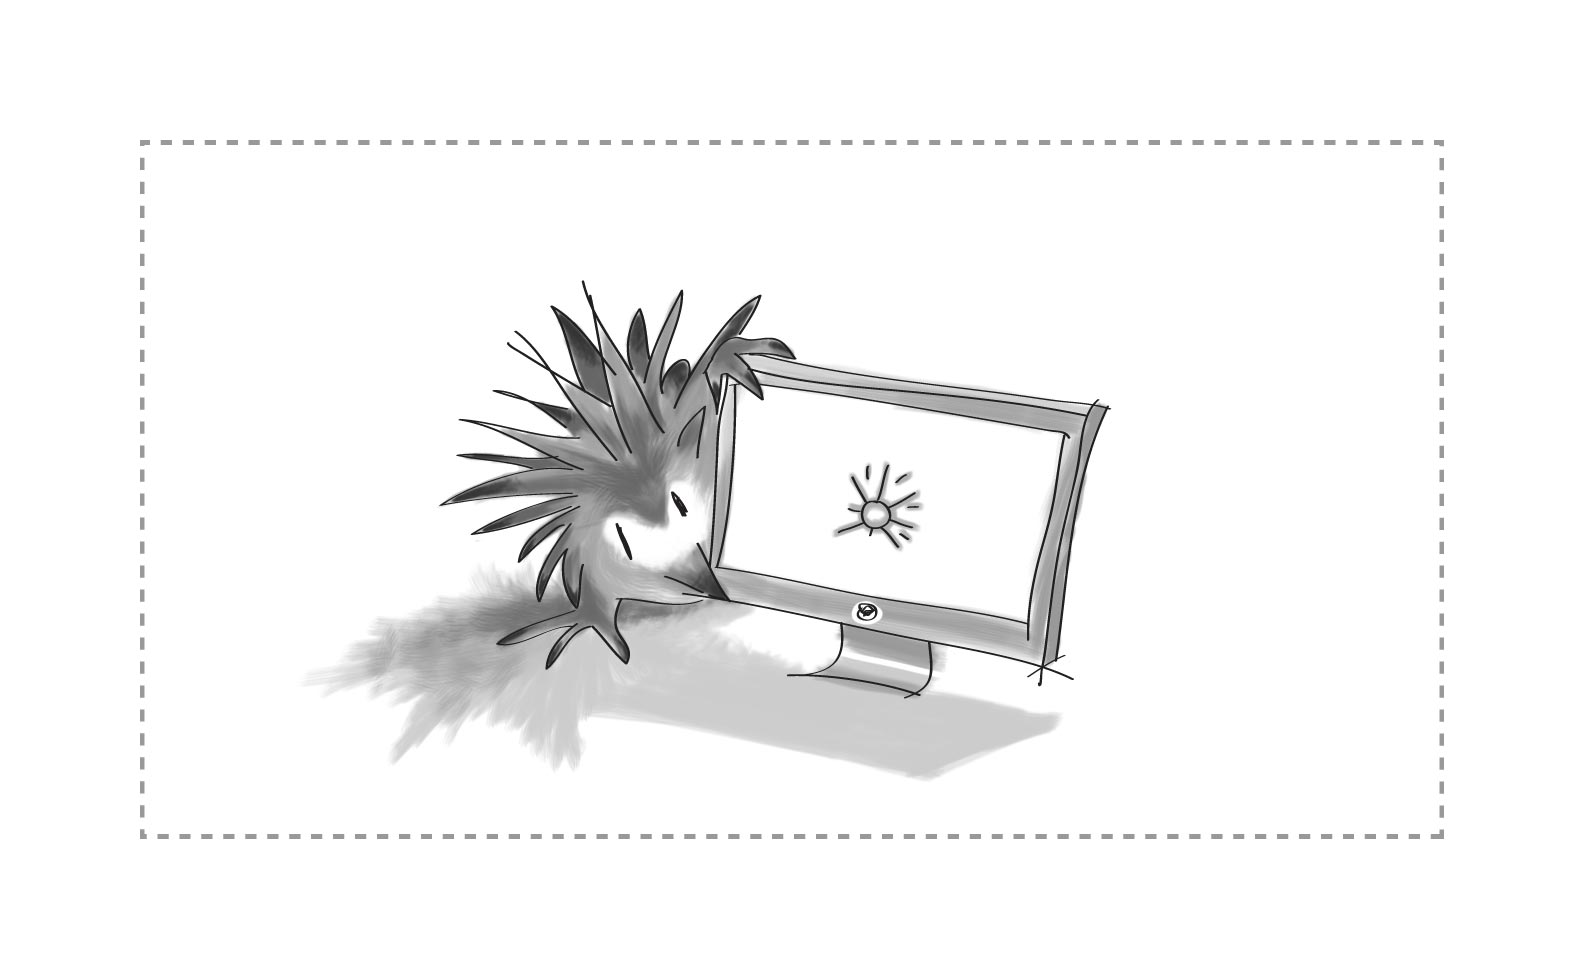 An image of an echidna looking at a Web page on a monitor.